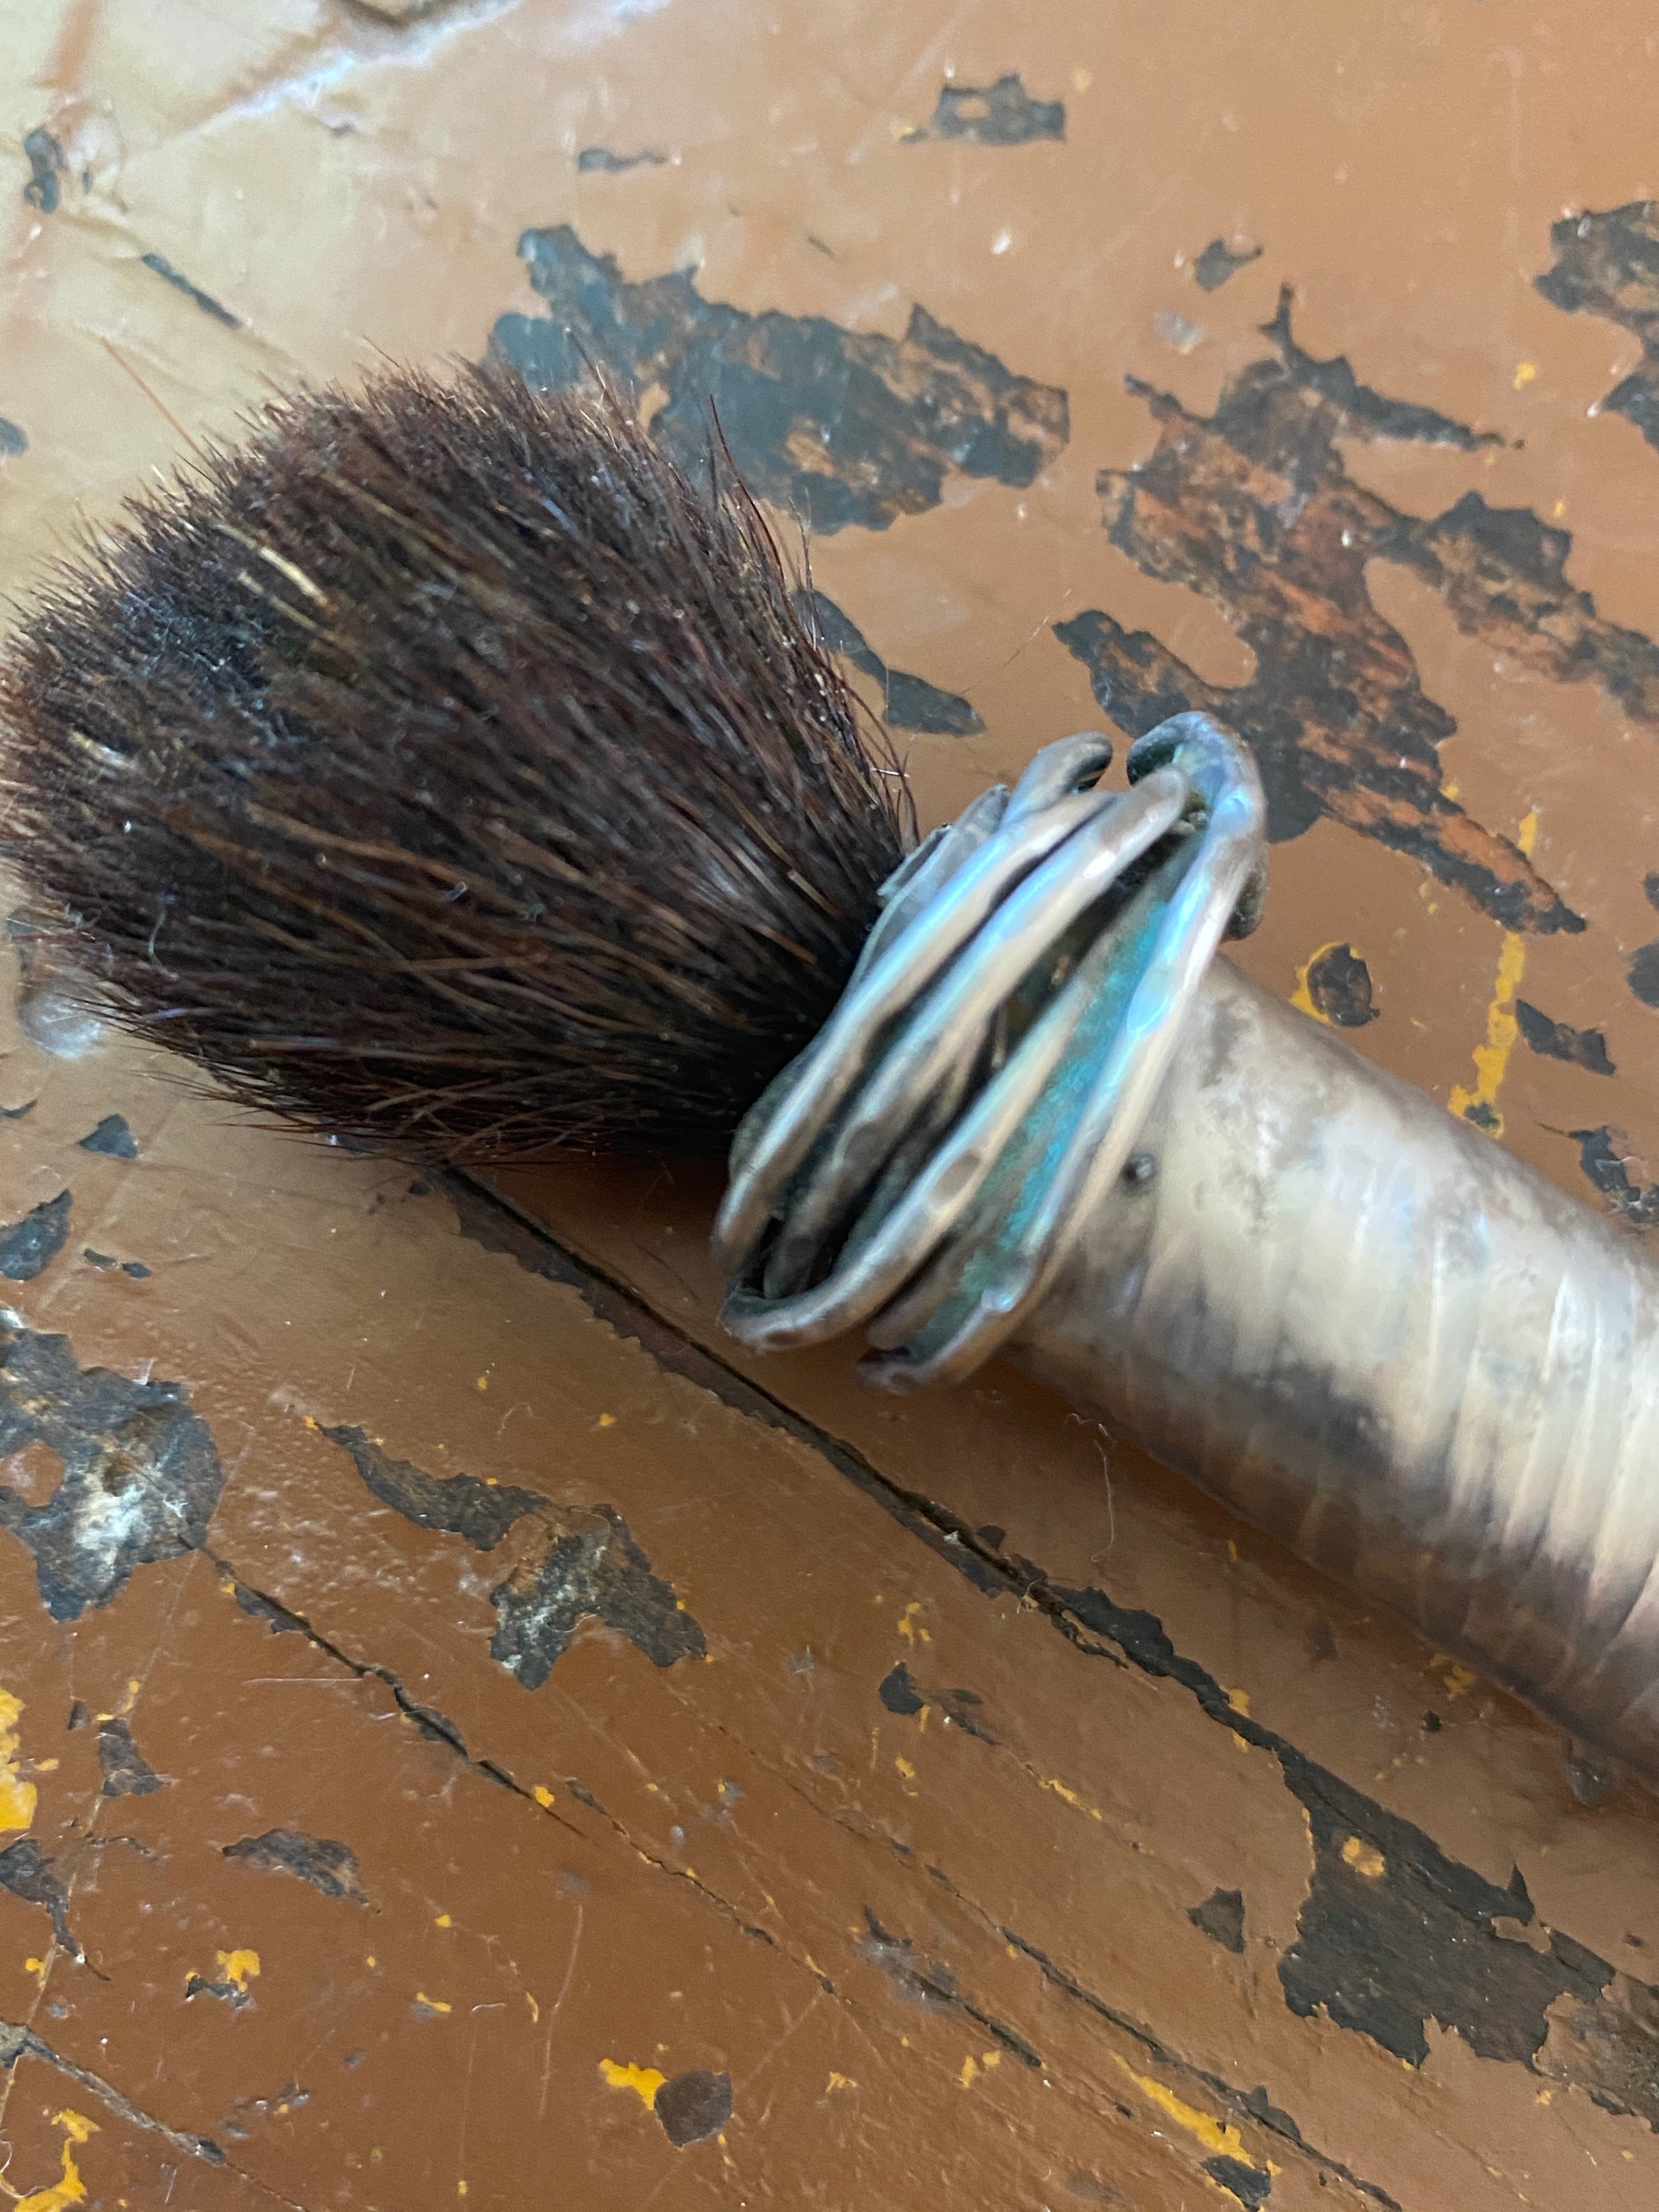 Upcycled - Sterling Silver Cosmetic Brush  - Vintage